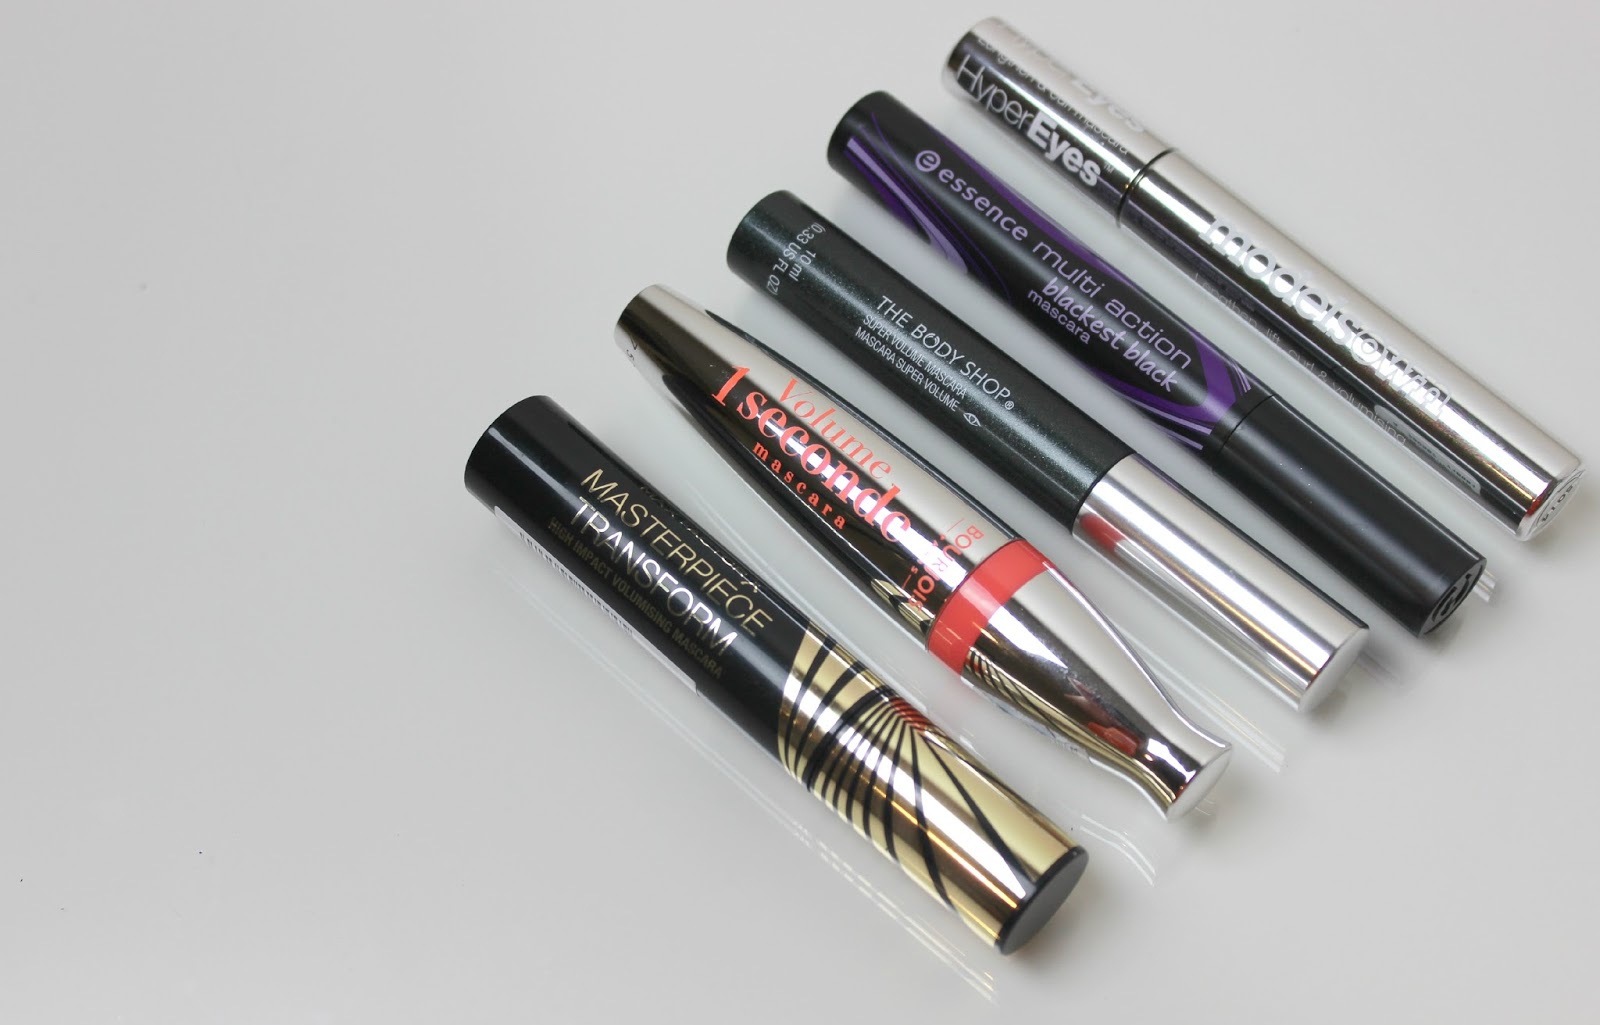 A picture of the best top budget mascaras